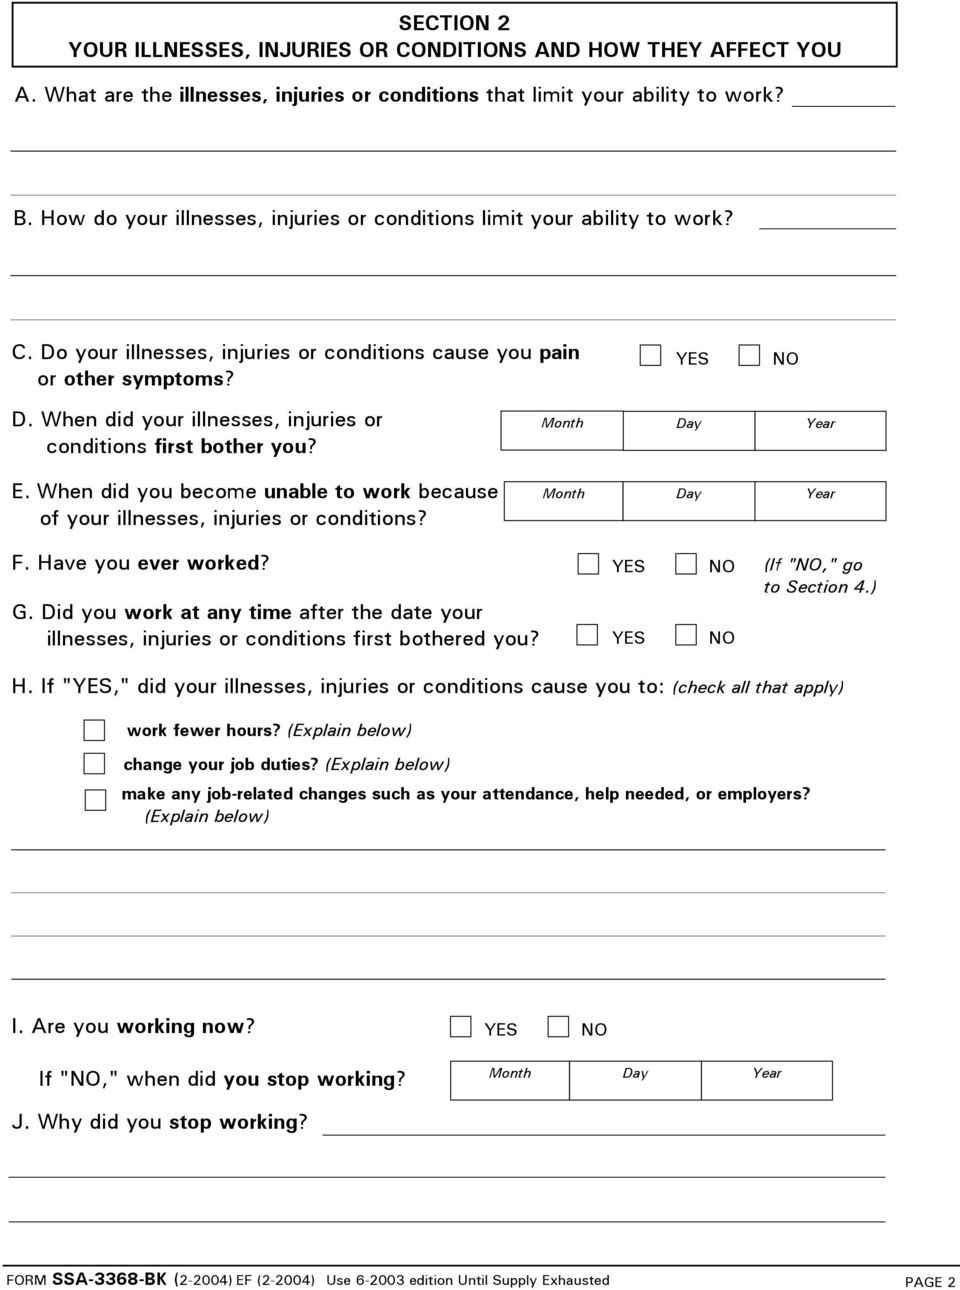 Disability Report Adult Form Ssa 3368 Bk Pdf Free Download